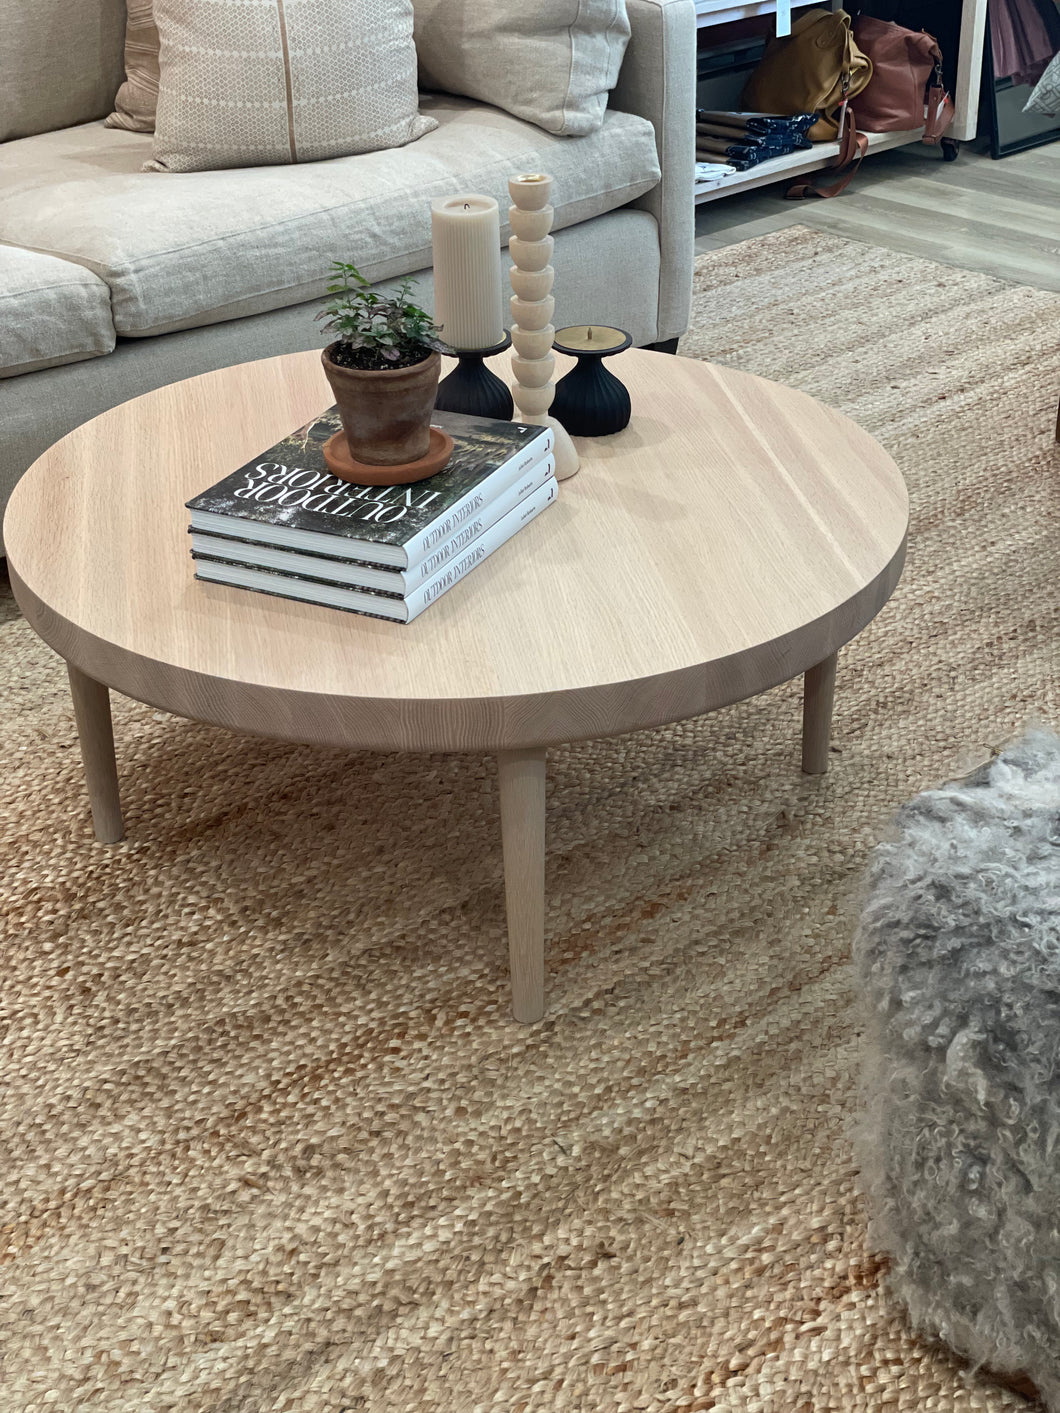 Studio89 | Washed Red Oak Coffee Table